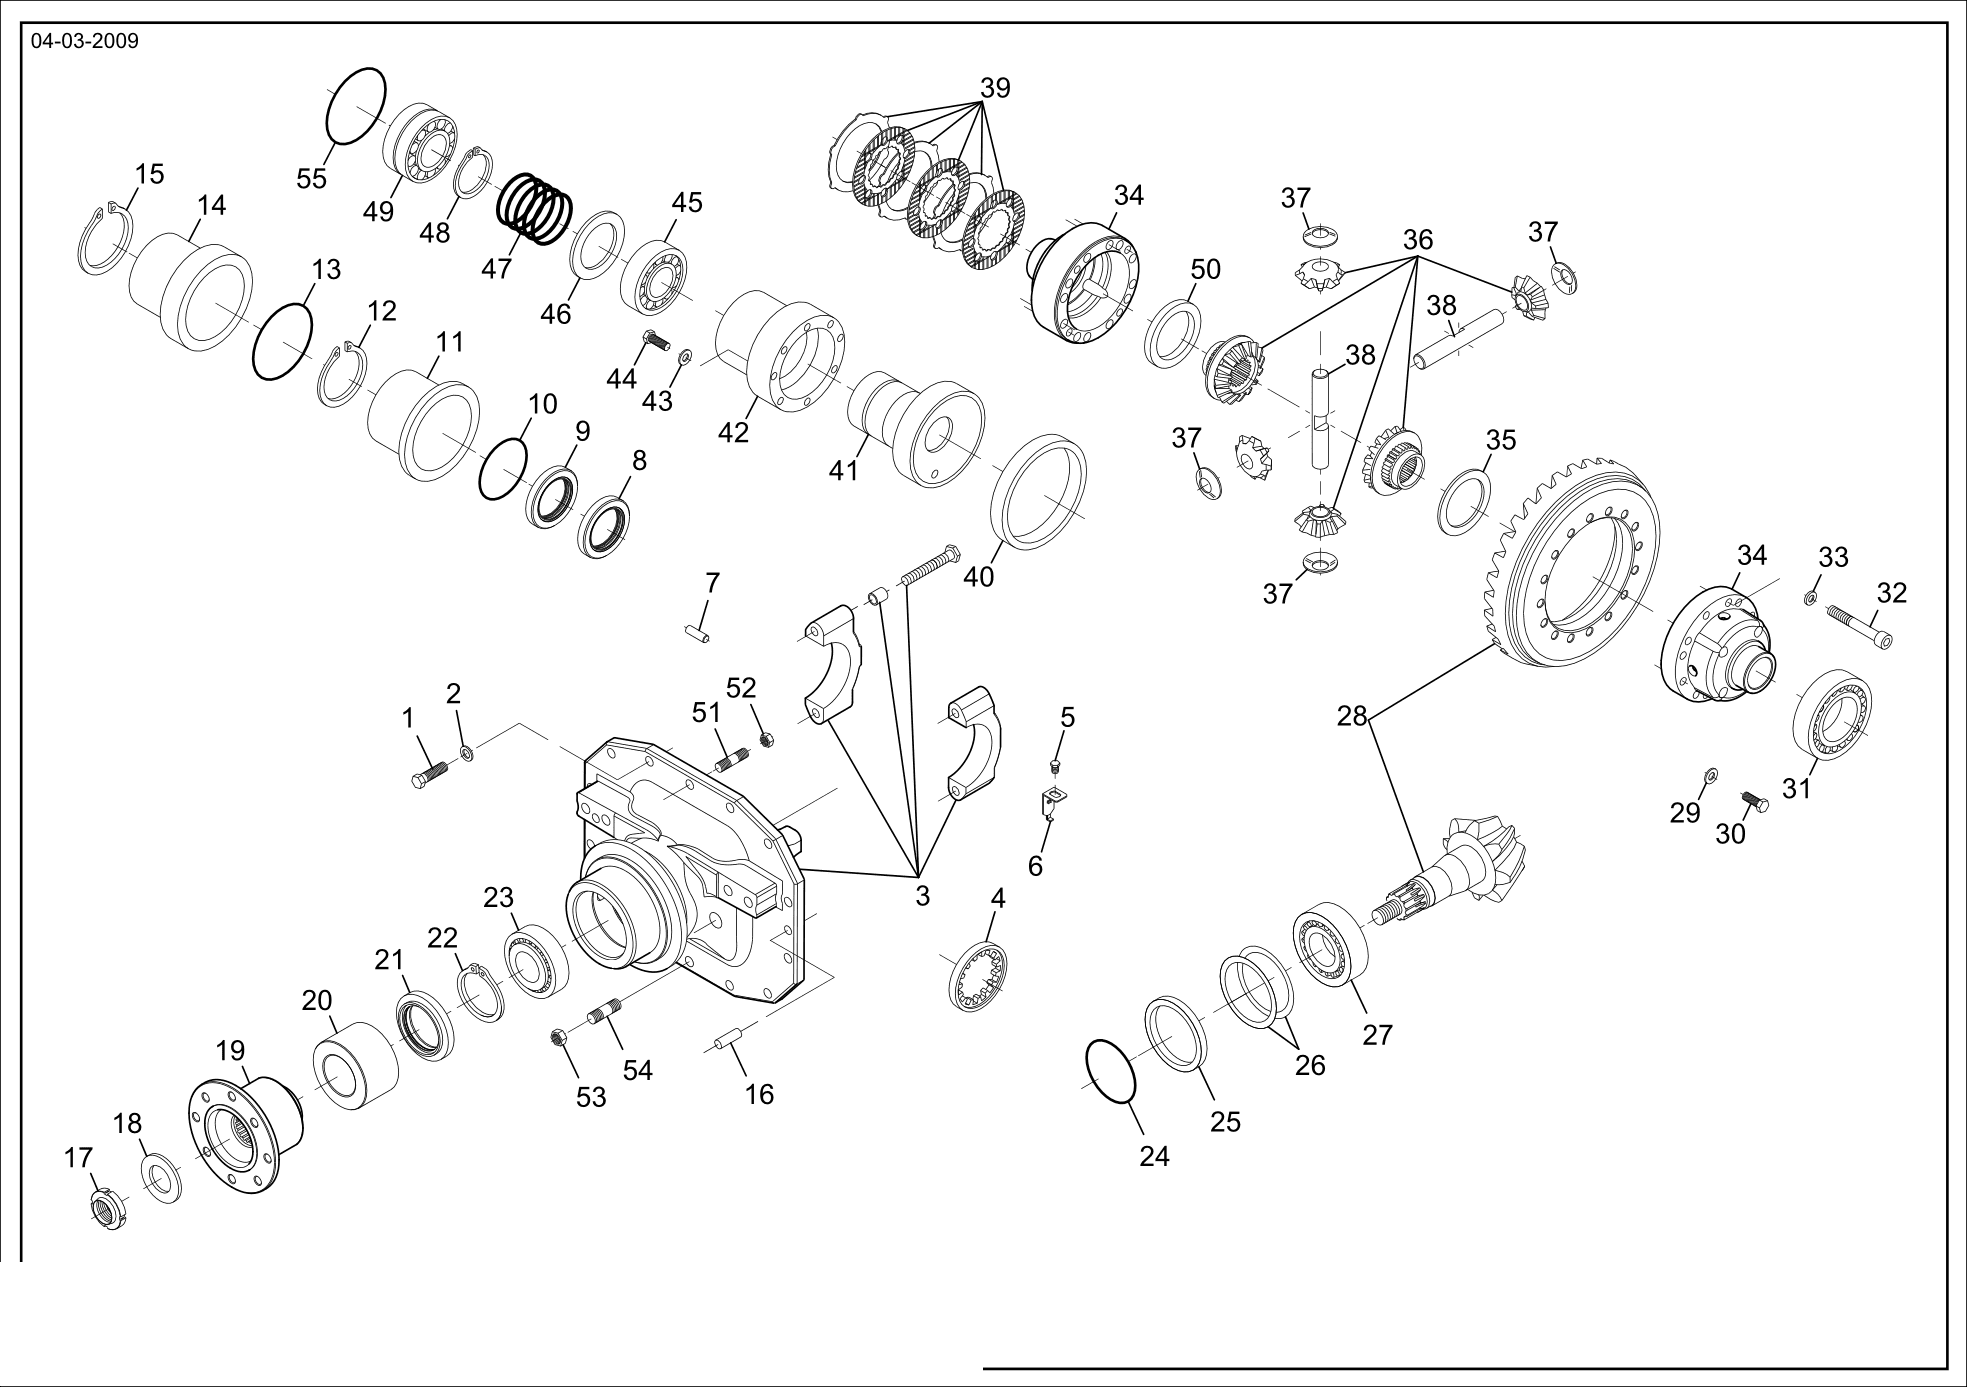 drawing for CNH NEW HOLLAND 1397 421014 - WASHER (figure 3)